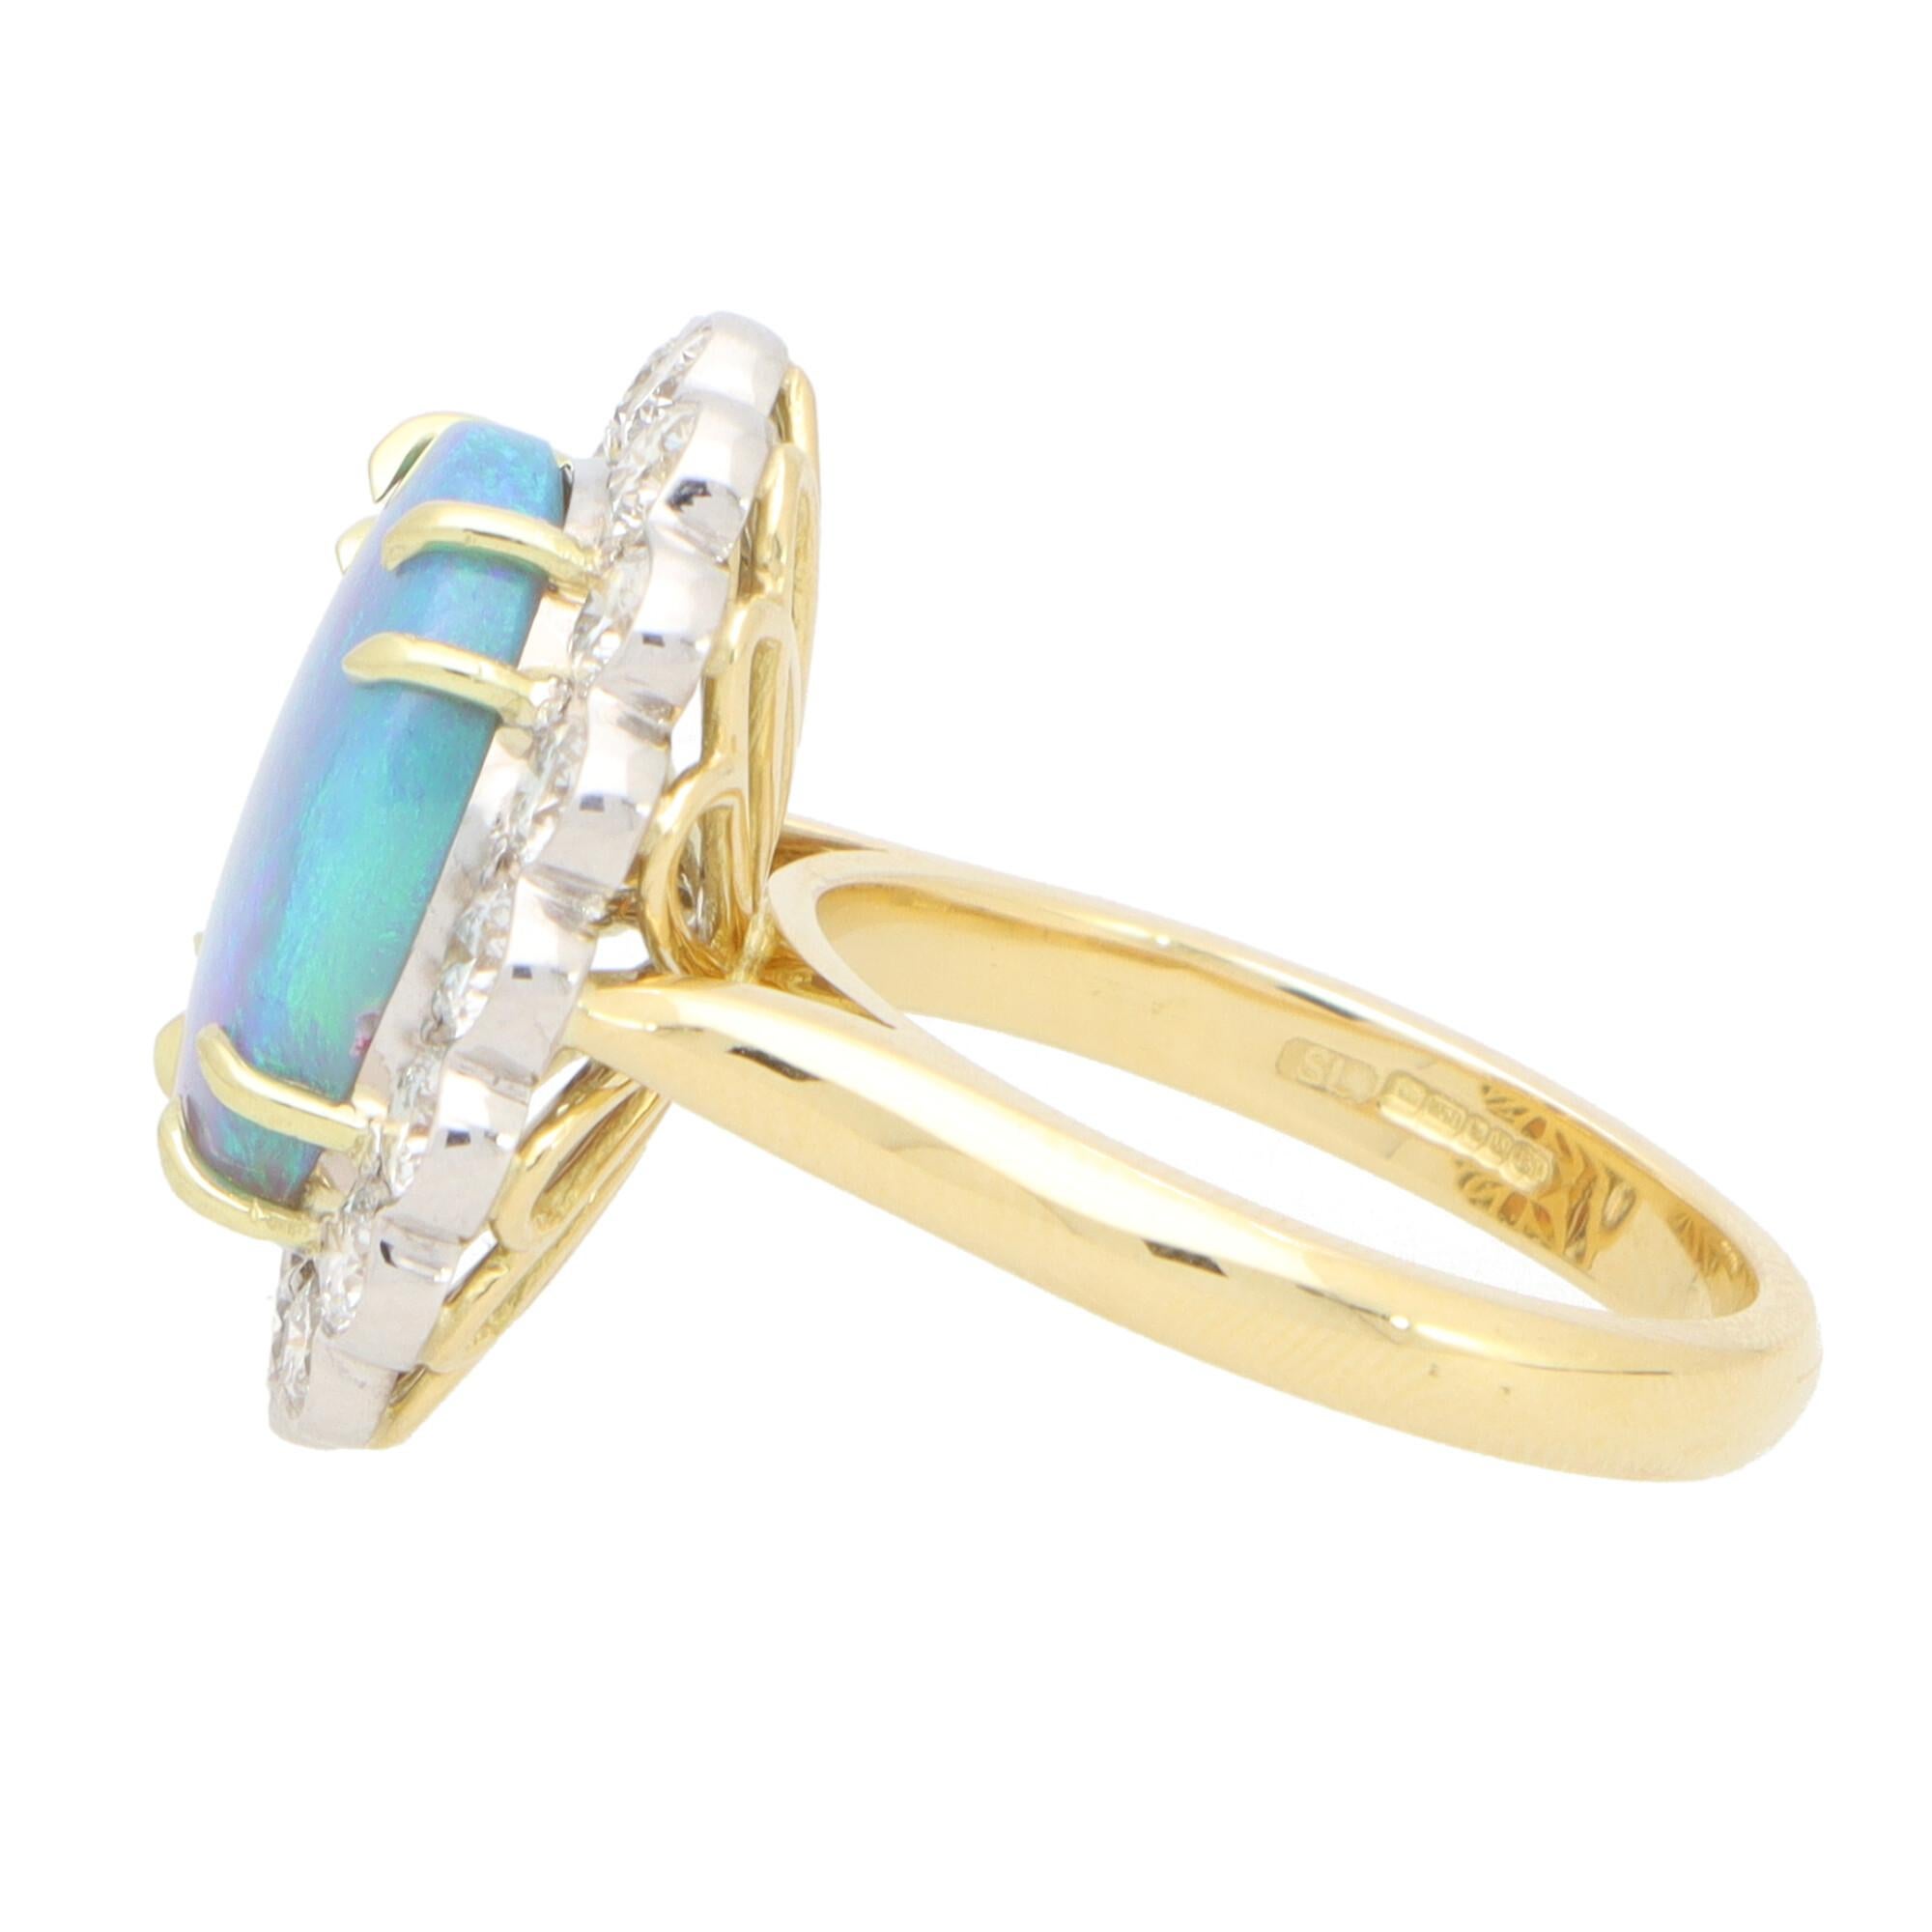 Women's or Men's Contemporary Opal and Diamond Cluster Ring Set in 18k Yellow and White Gold